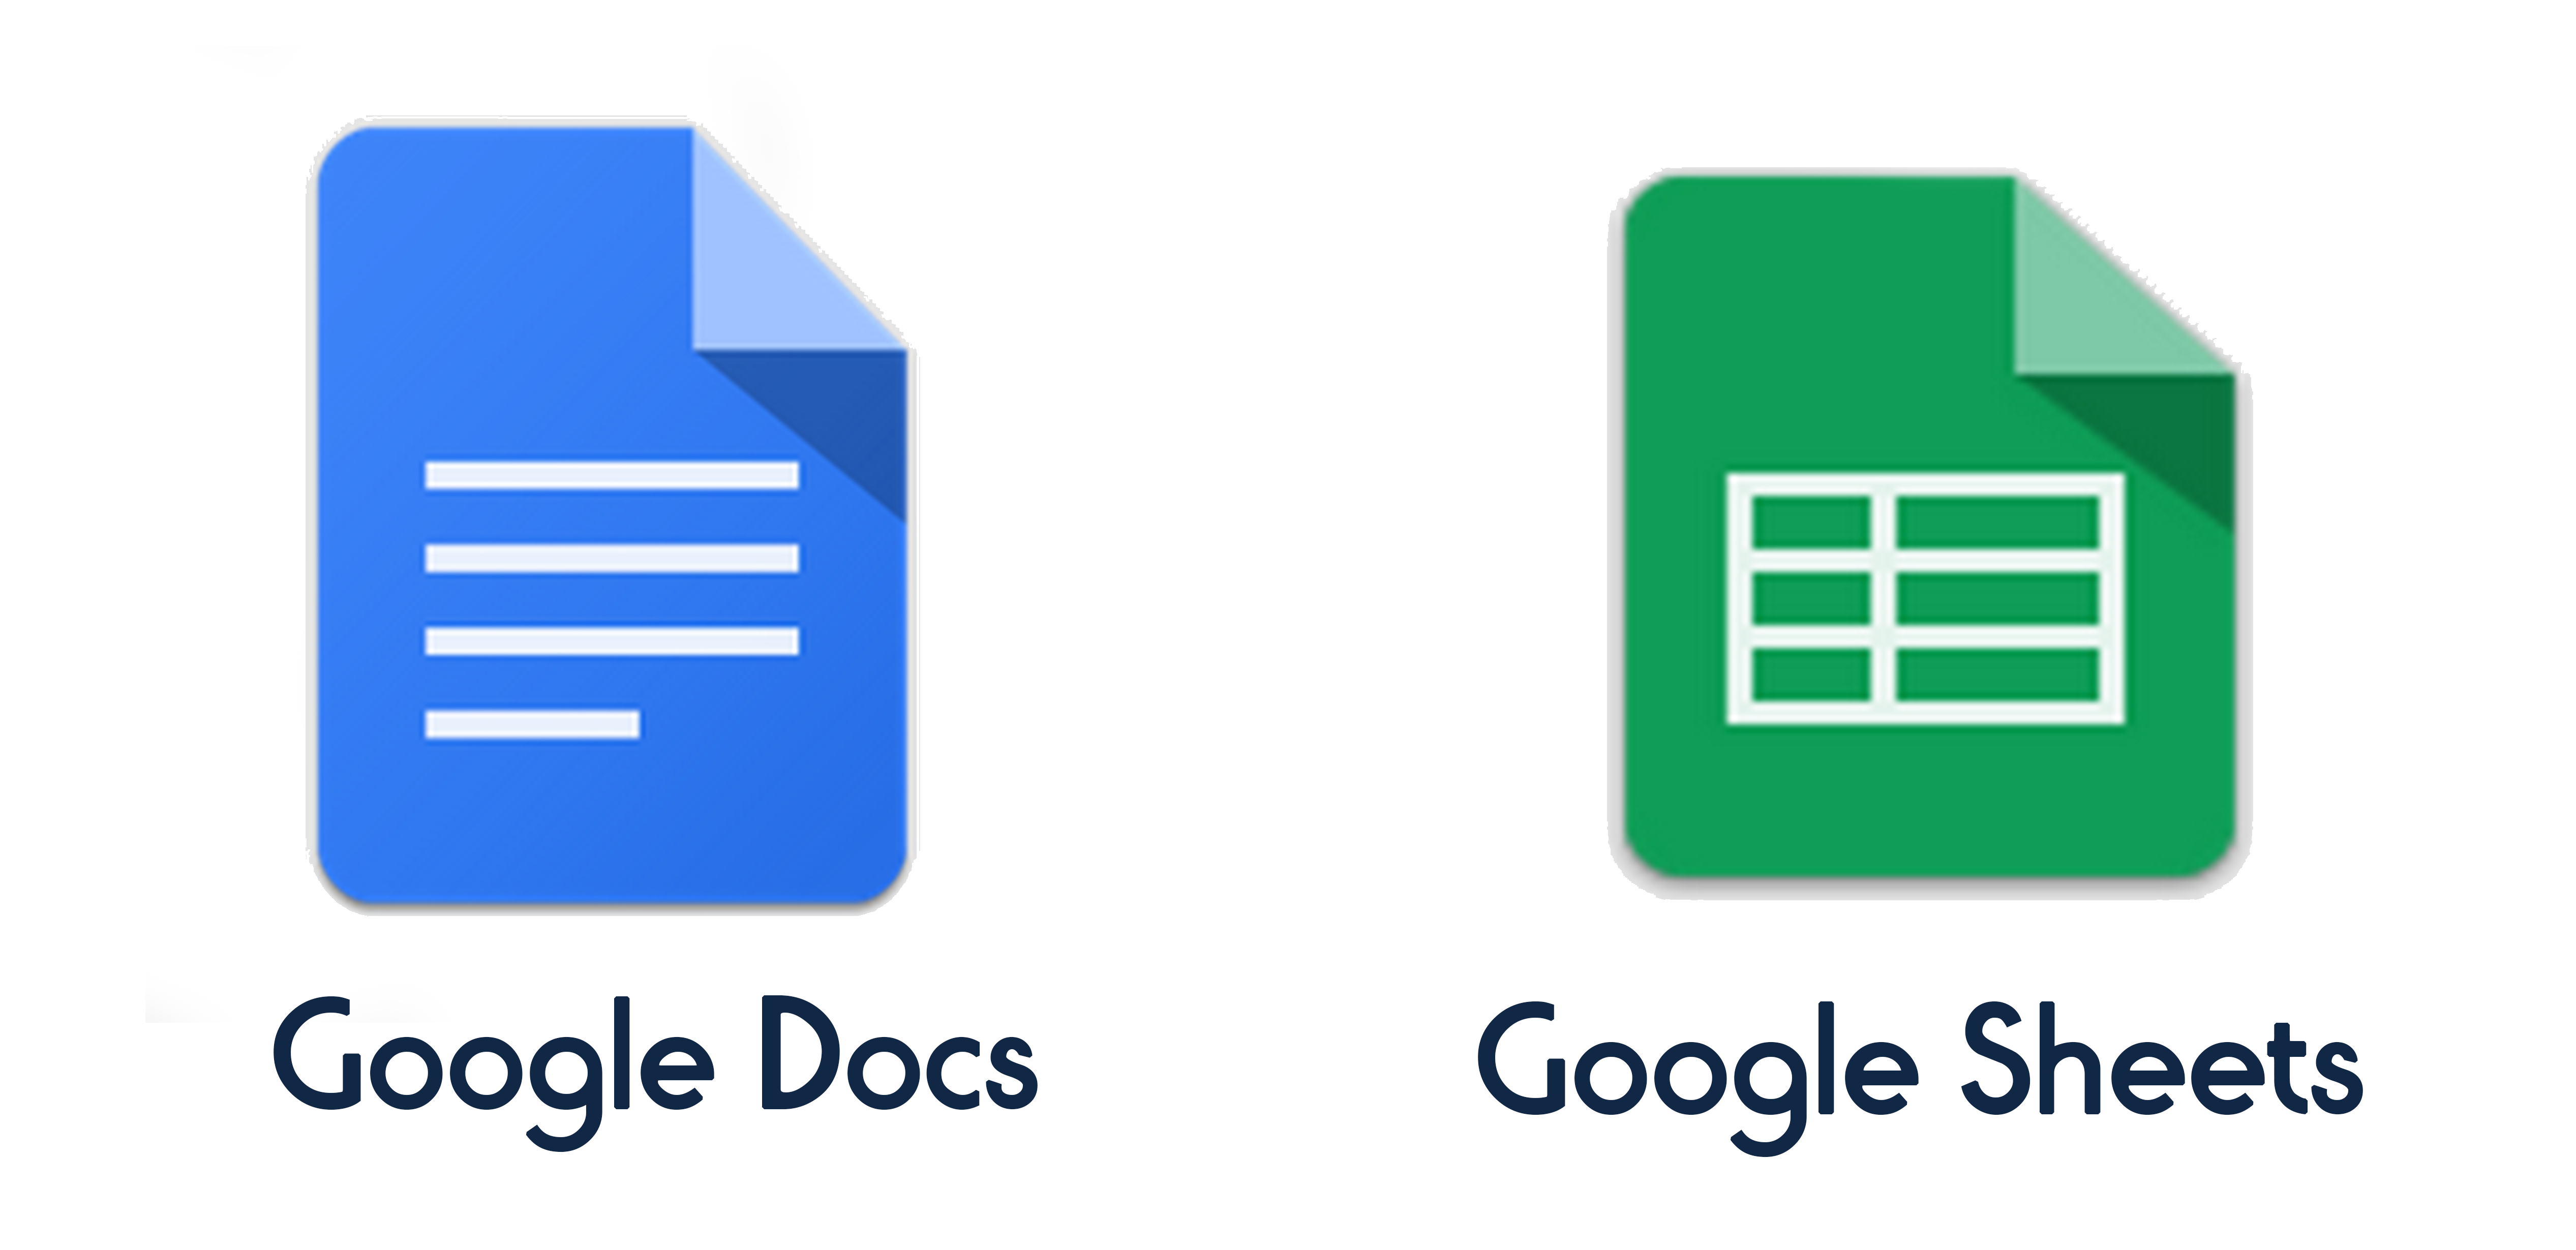 google-docs-and-sheets-apps-lands-in-play-store-goandroid